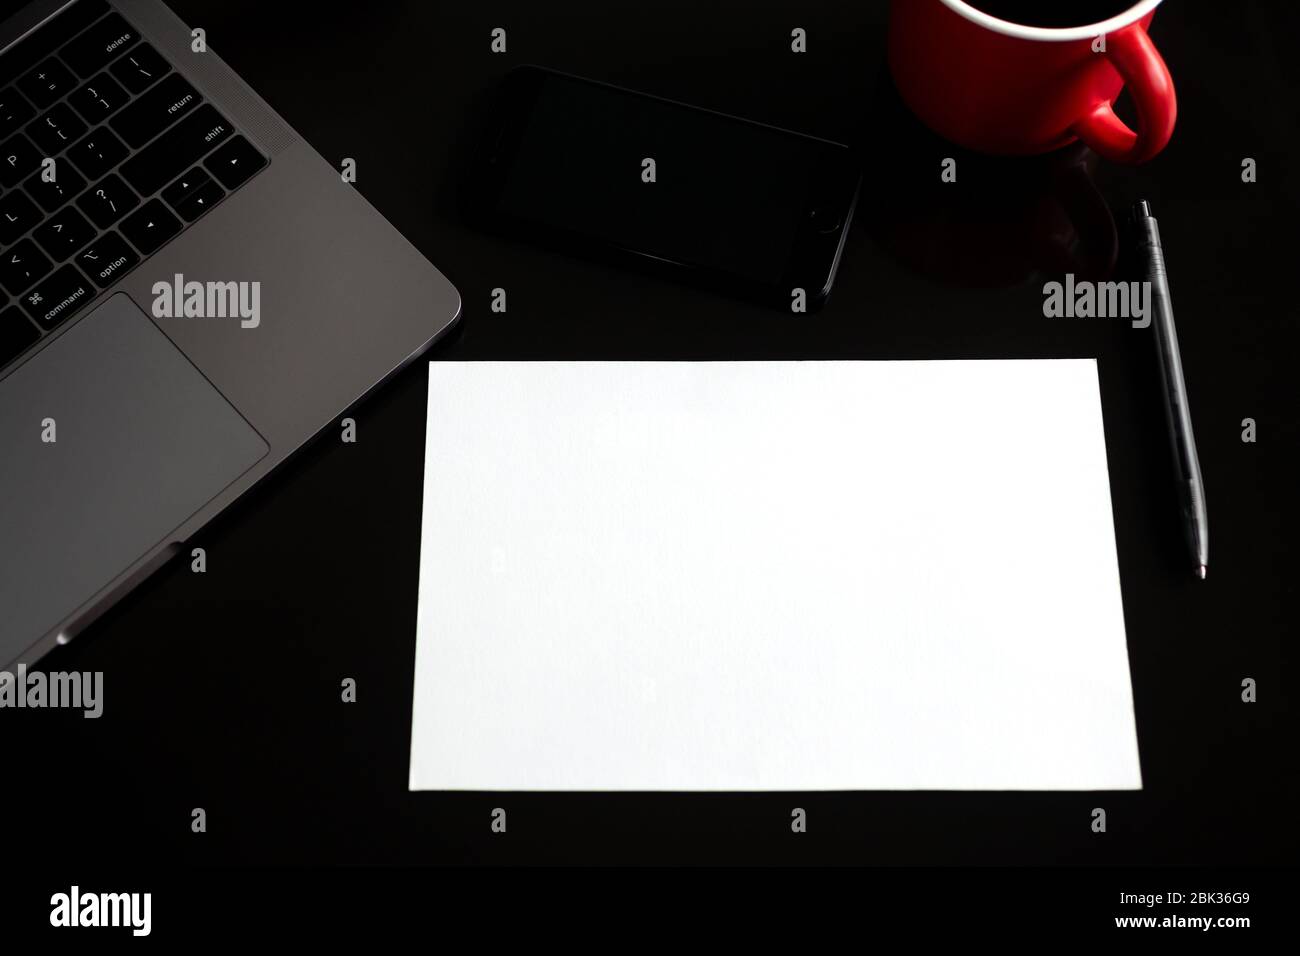 Toronto, Canada - 30, April, 2020: Blank paper with copy space, coffee cup, phone, laptop on black desk table. Top view, flat lay Stock Photo